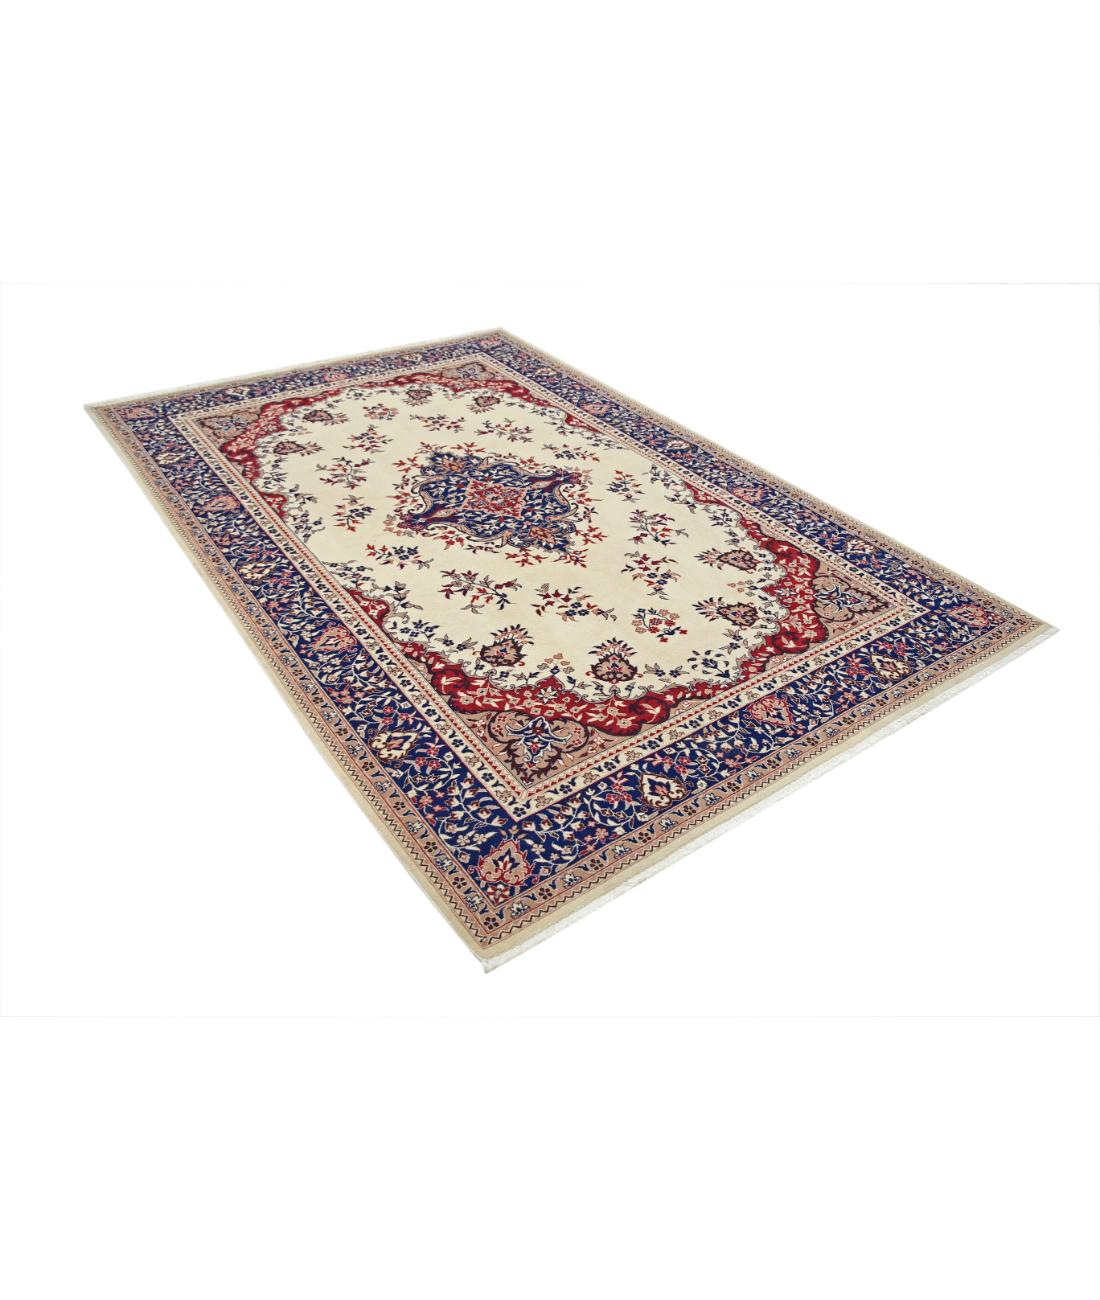 Heritage 6' 0" X 8' 11" Hand-Knotted Wool Rug 6' 0" X 8' 11" (183 X 272) / Ivory / Blue